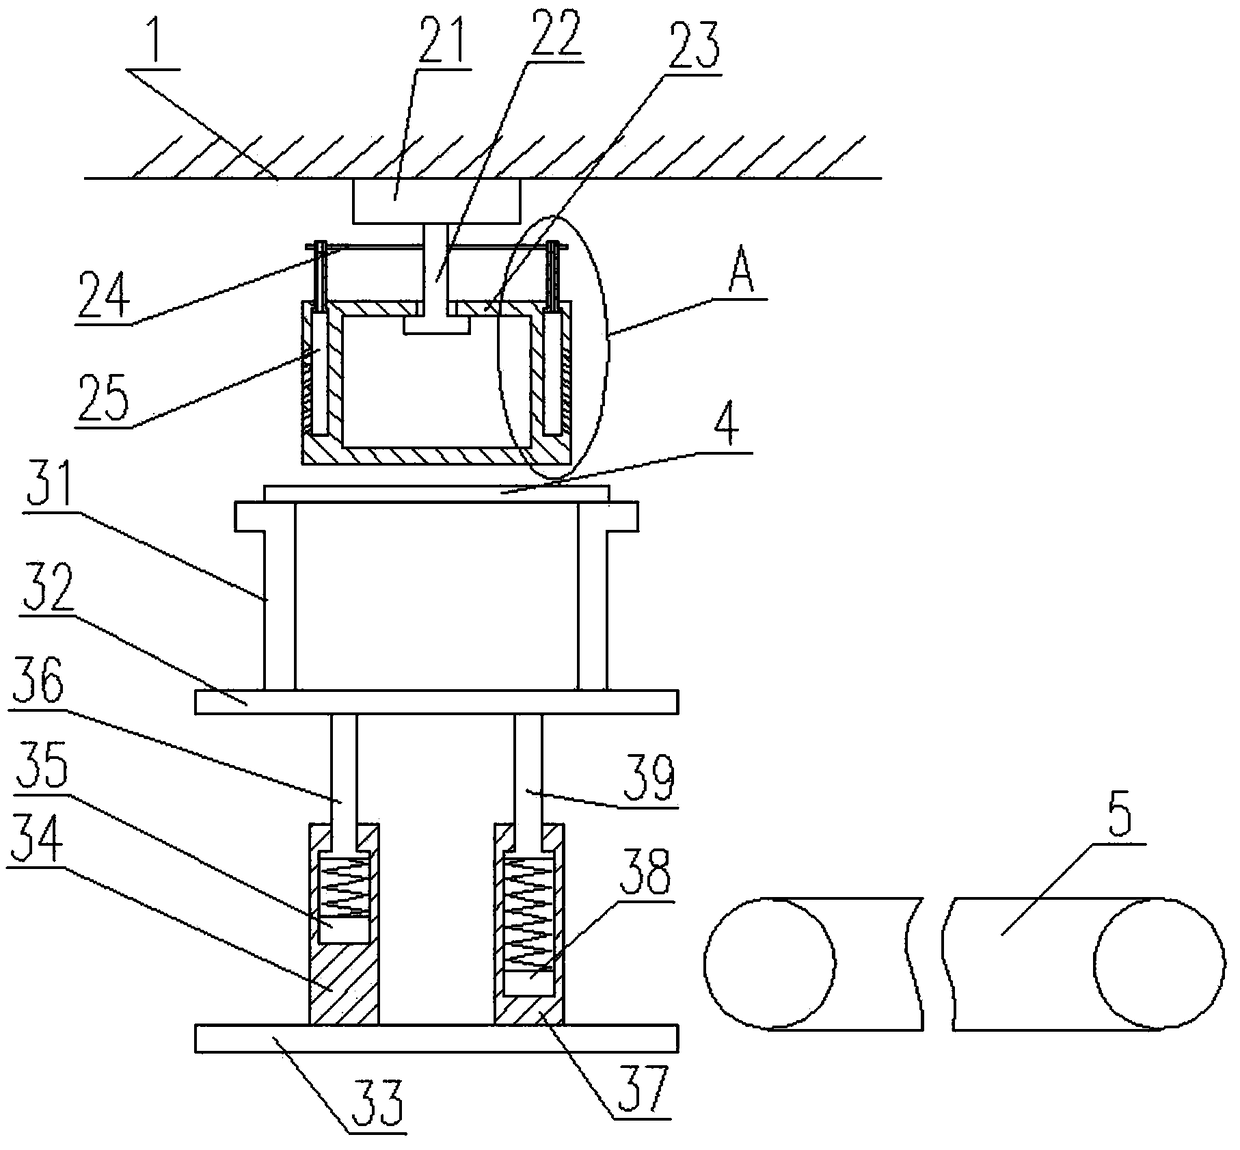 Carton automatic forming device